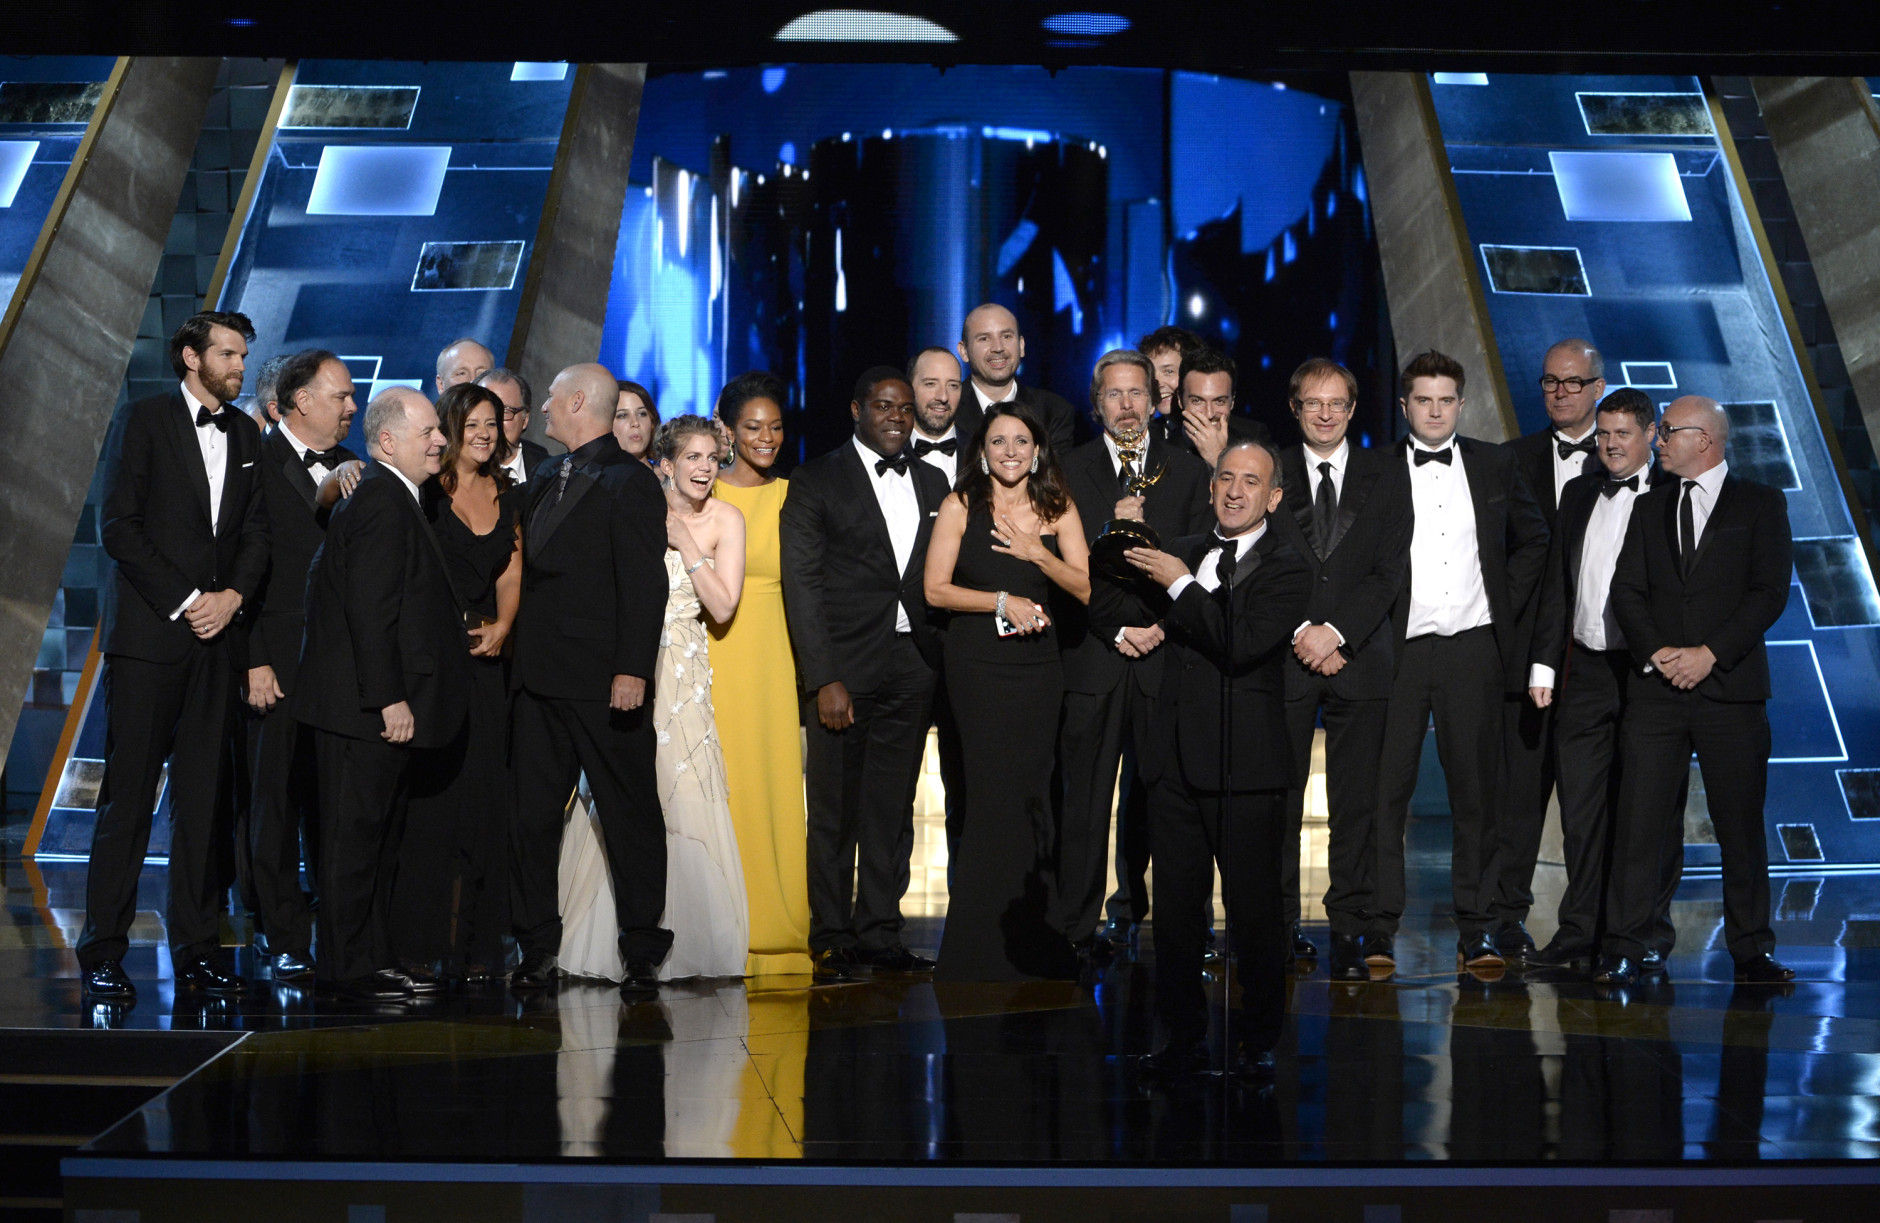 Armando Iannucci, center, and the cast and crew of "Veep" accept the award for outstanding comedy series at the 67th Primetime Emmy Awards on Sunday, Sept. 20, 2015, at the Microsoft Theater in Los Angeles. (Photo by Phil McCarten/Invision for the Television Academy/AP Images)